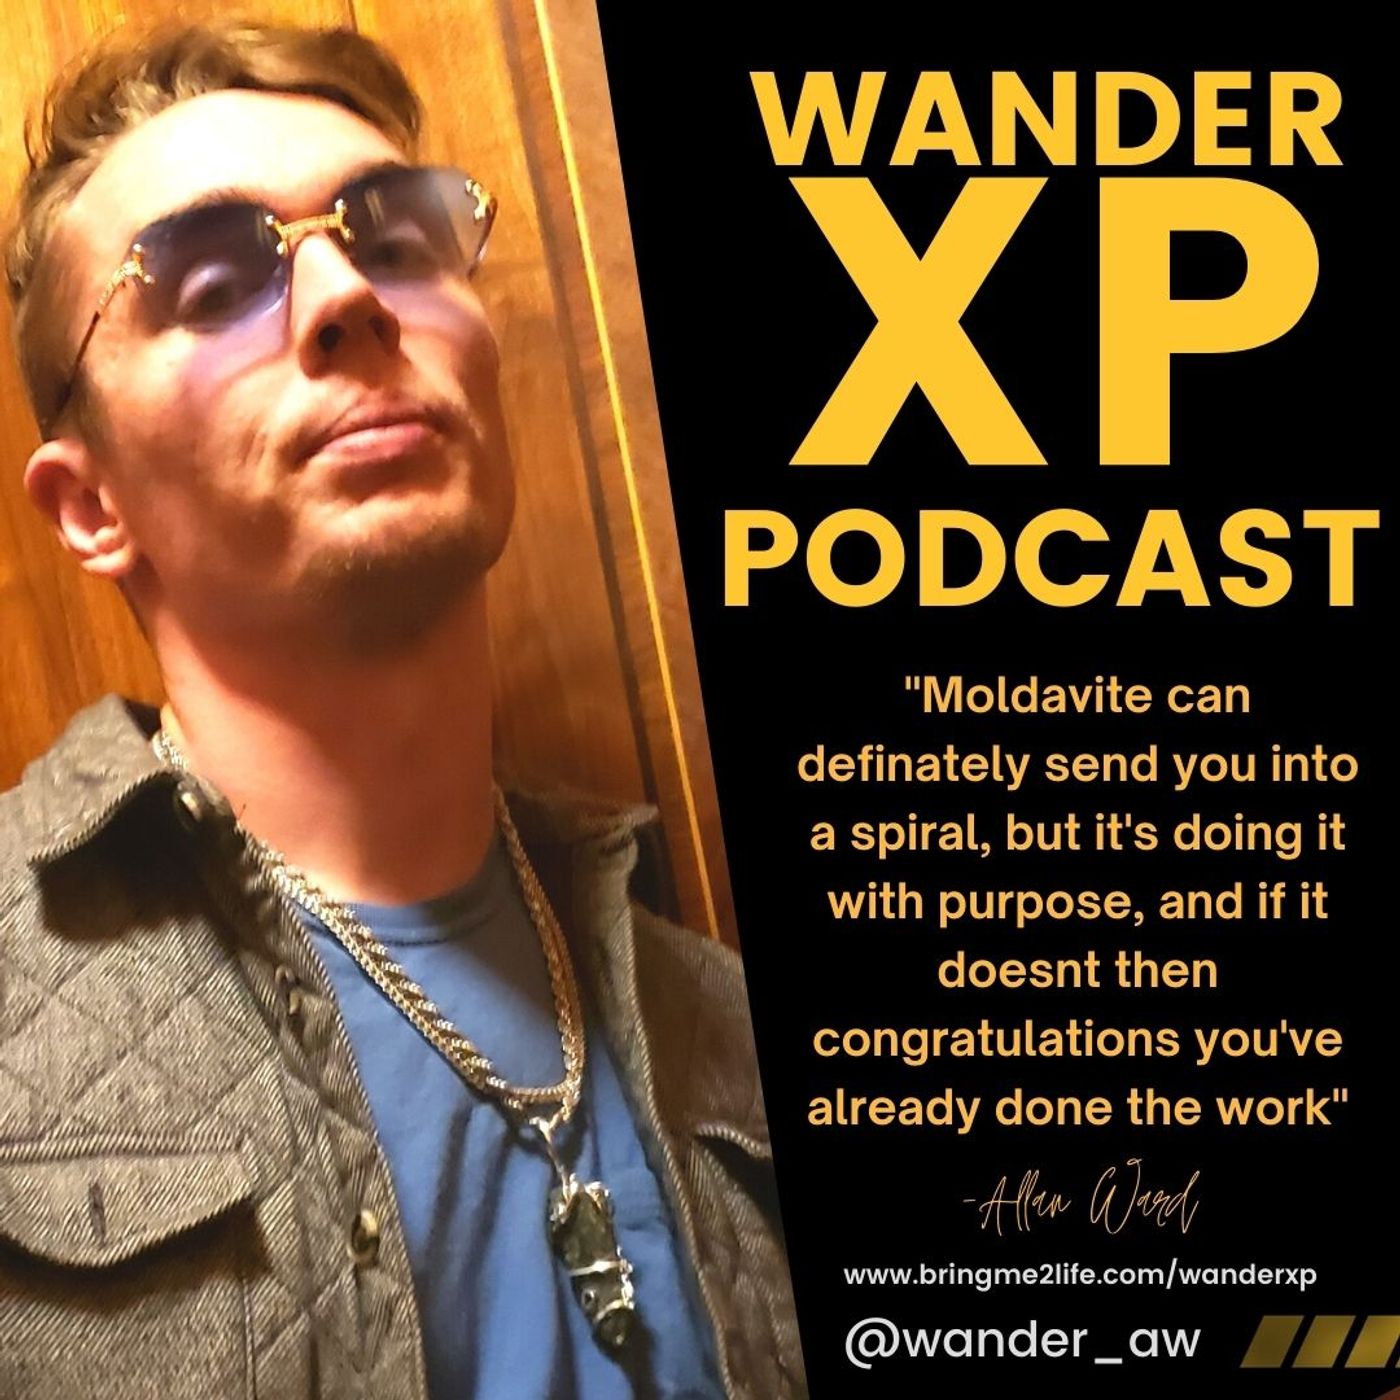 Wander xp- Episode 10 - Moldavite and Crystal Vibes with Shannon Shine